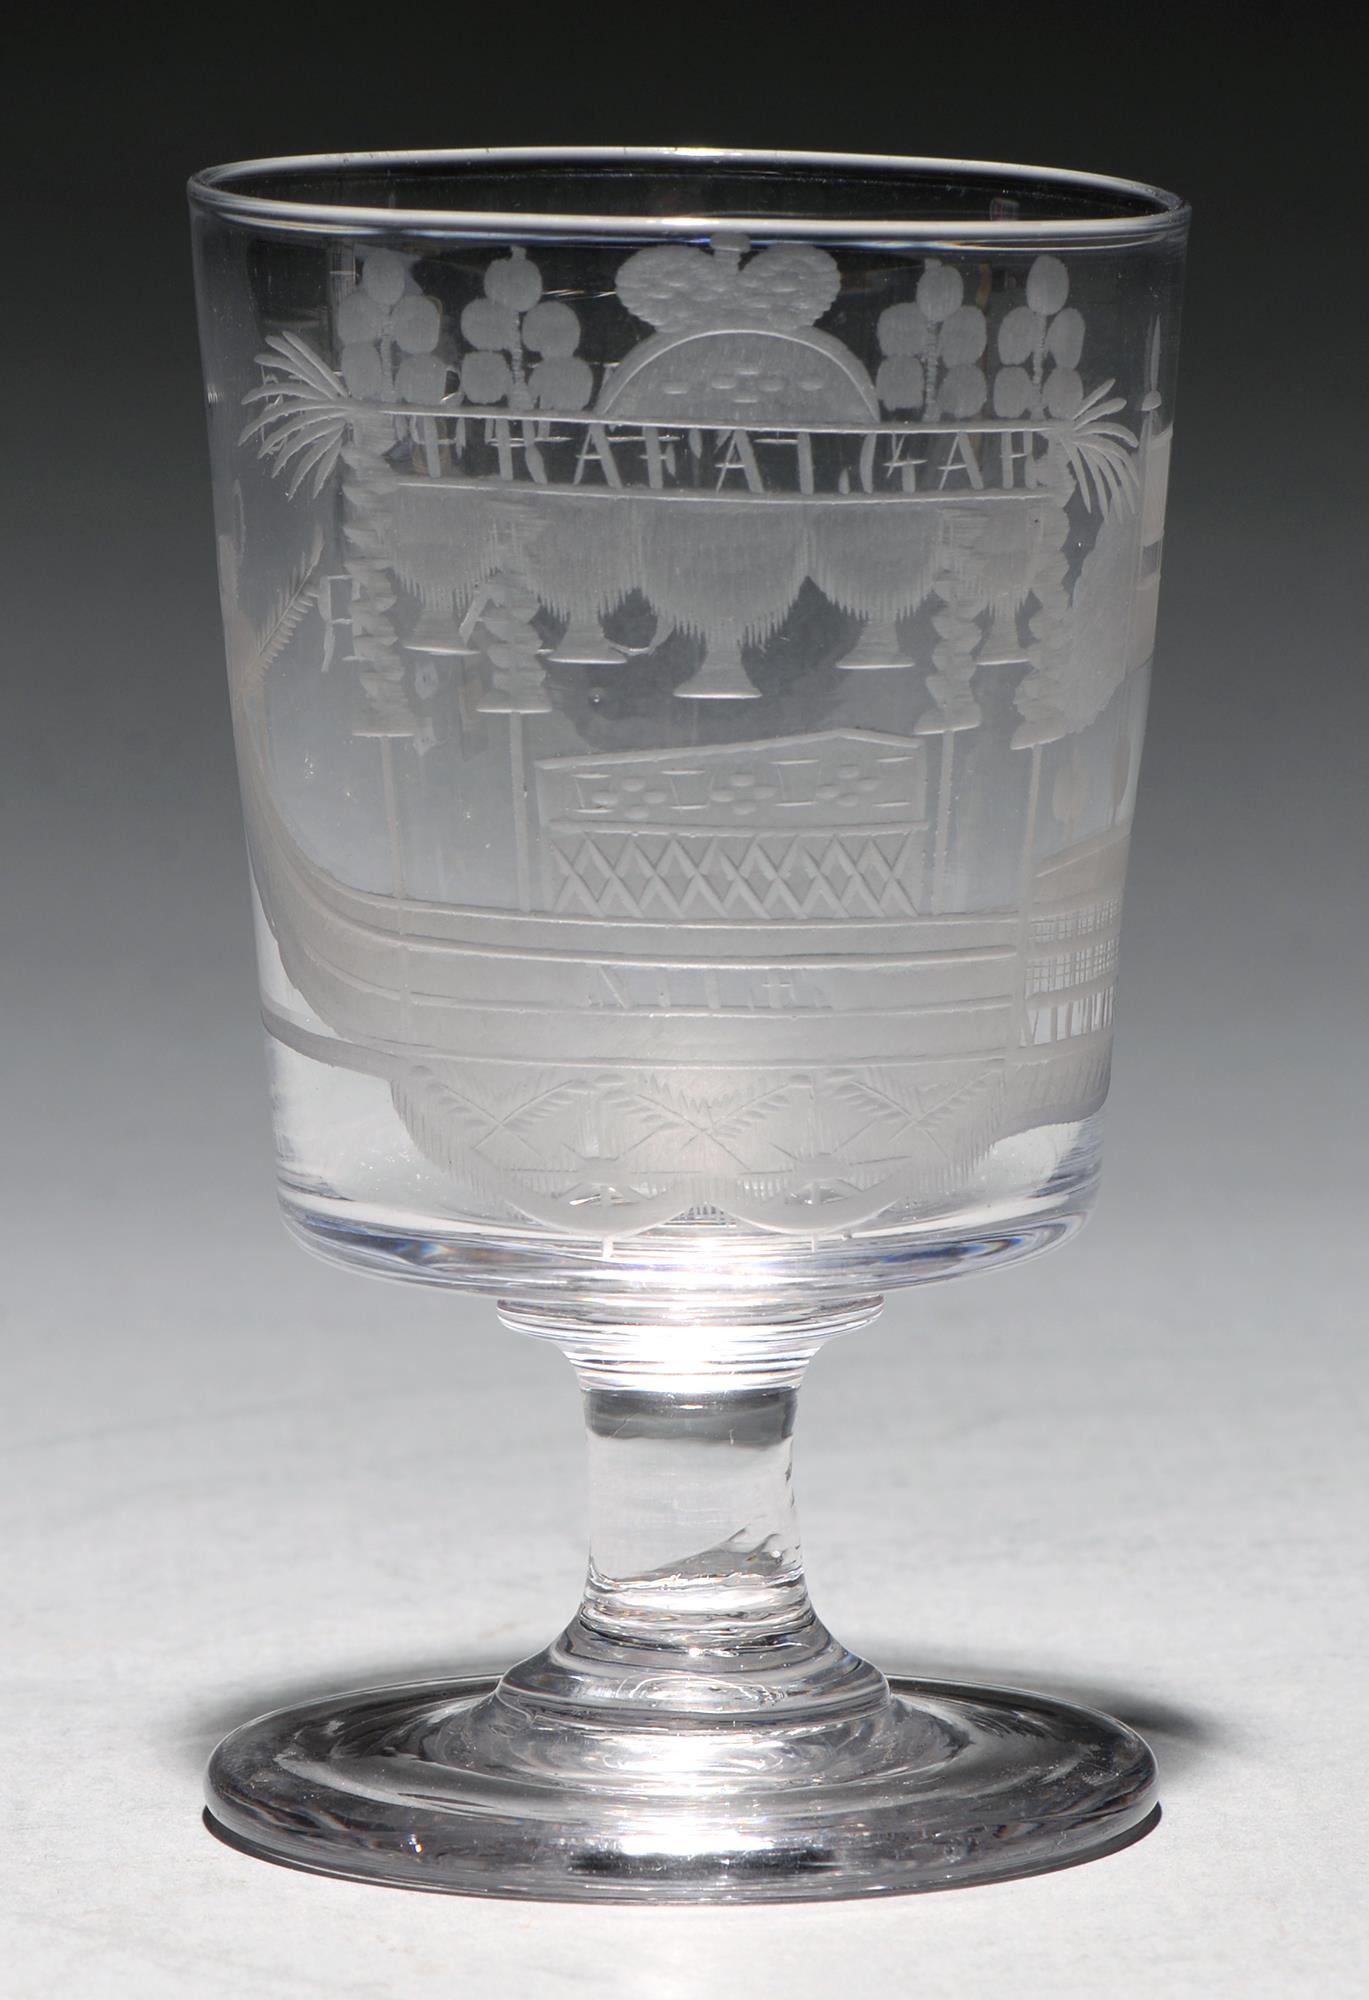 Death of Nelson. A Regency commemorative glass goblet, c1805, the bucket bowl engraved with Nelson's